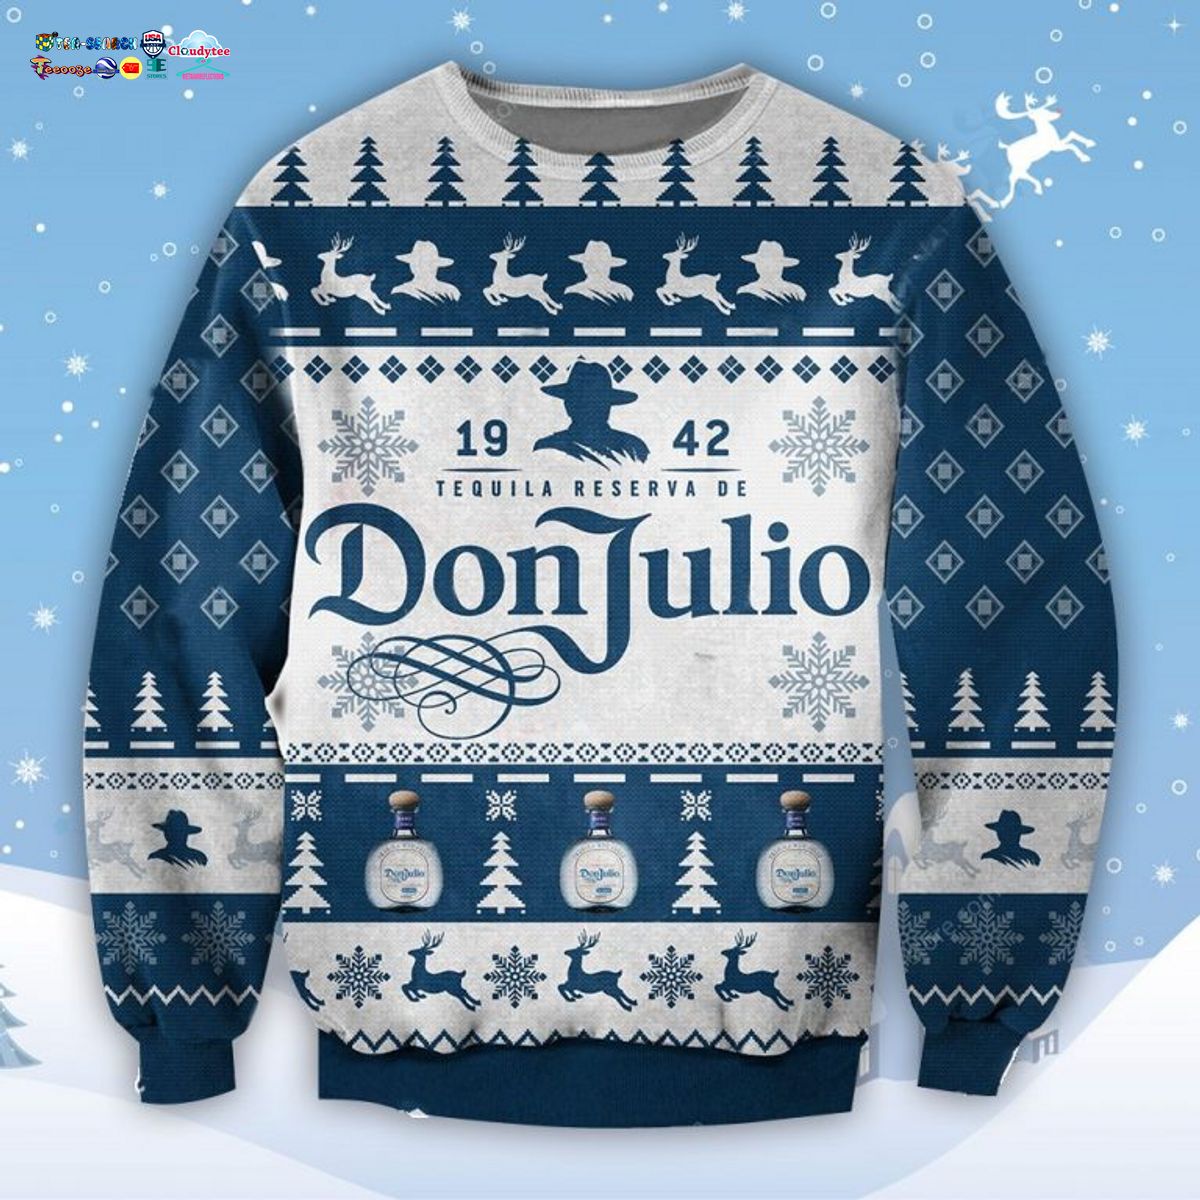 Don Julio Ugly Christmas Sweater